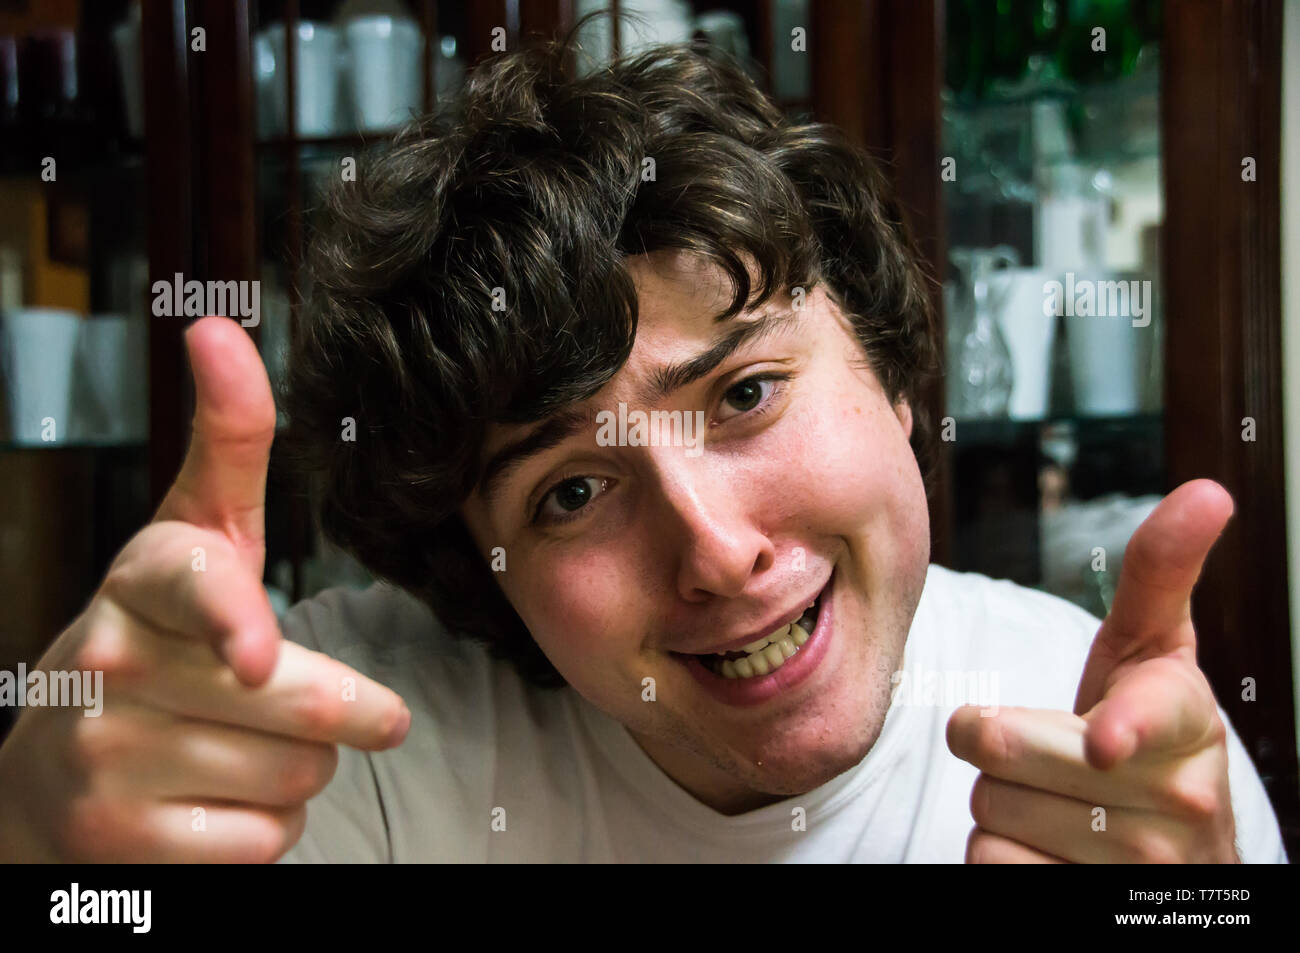 Crazy young man acting comedic Stock Photo